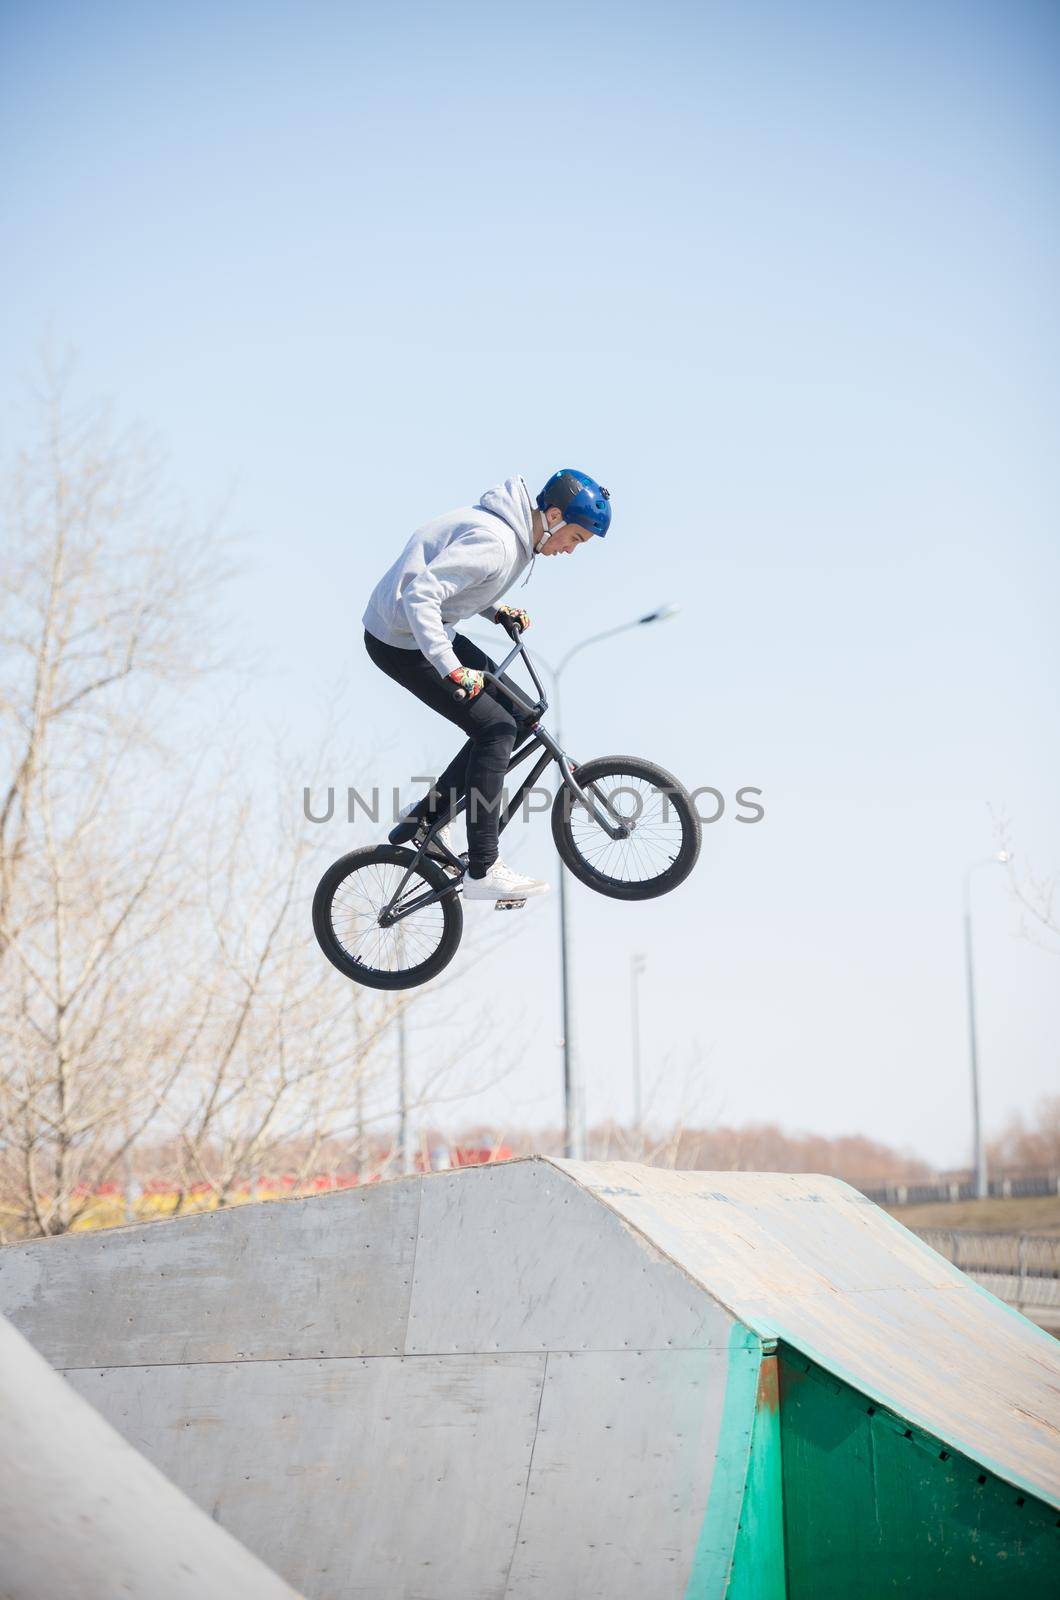 A bmx rider in the skatepark in the air. Daylight. Mid shot